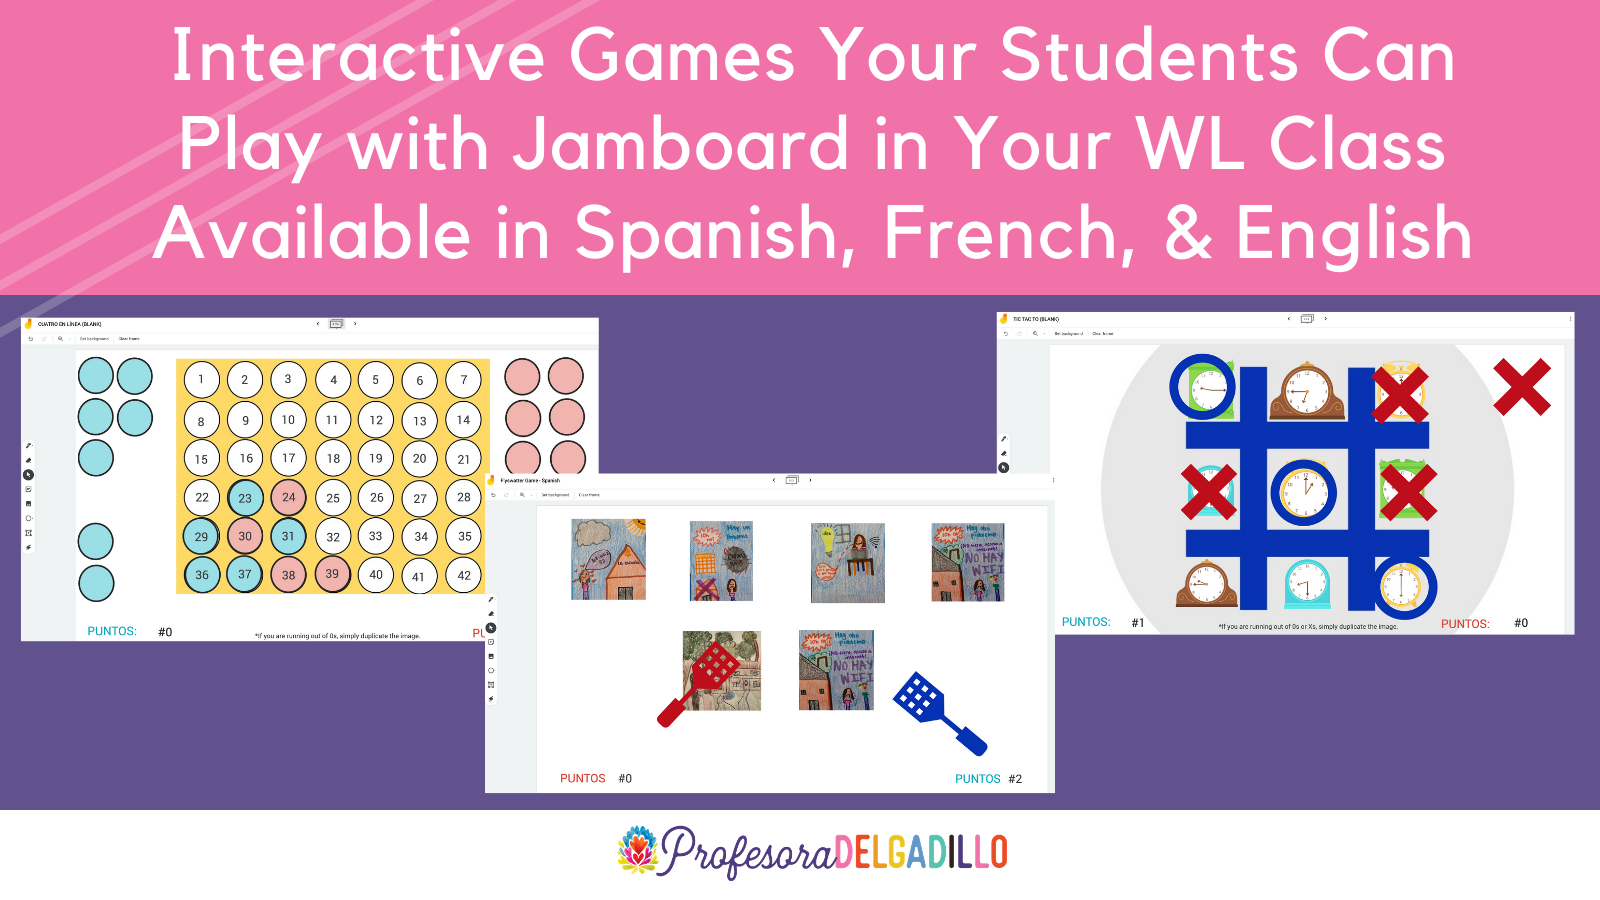 Interactive Games Your Students Can Play with Jamboard in Your WL